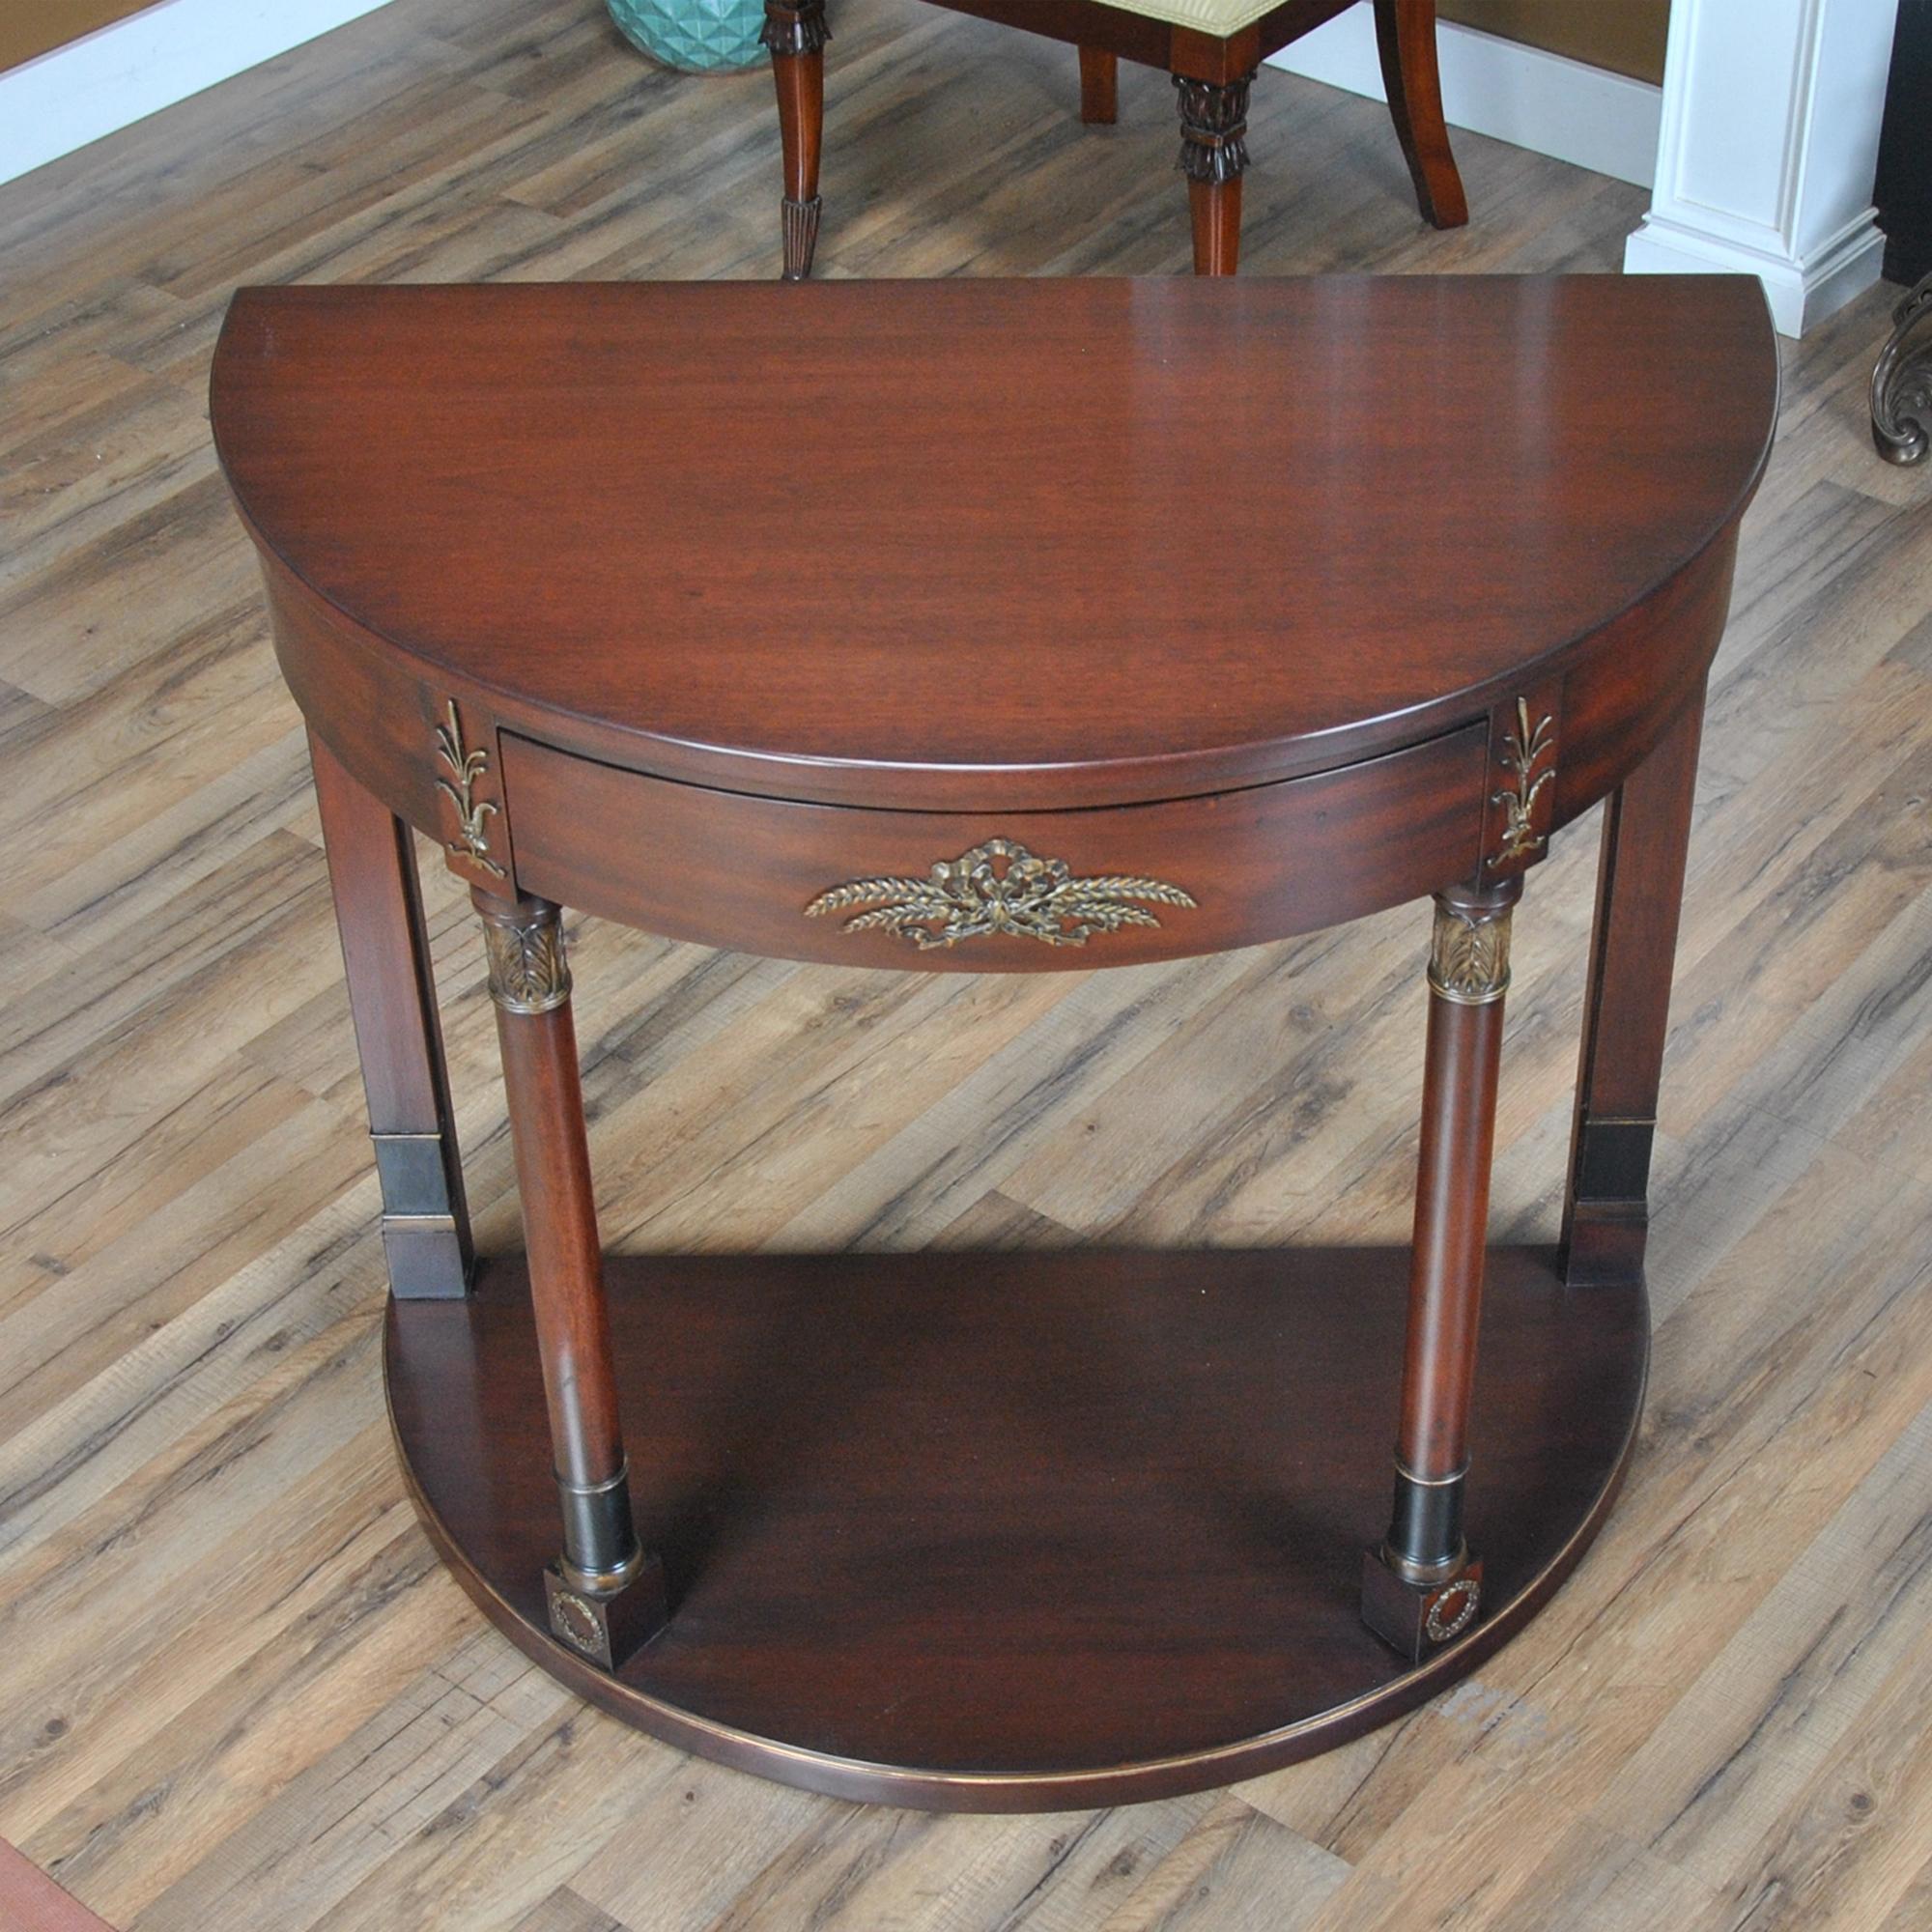 The Kittinger mahogany console with columns, Model A903 in the Kittinger catalog. This stylish piece has fantastic details throughout; including the original condition pull out drawer with solid oak drawer interiors, the solid mahogany turned